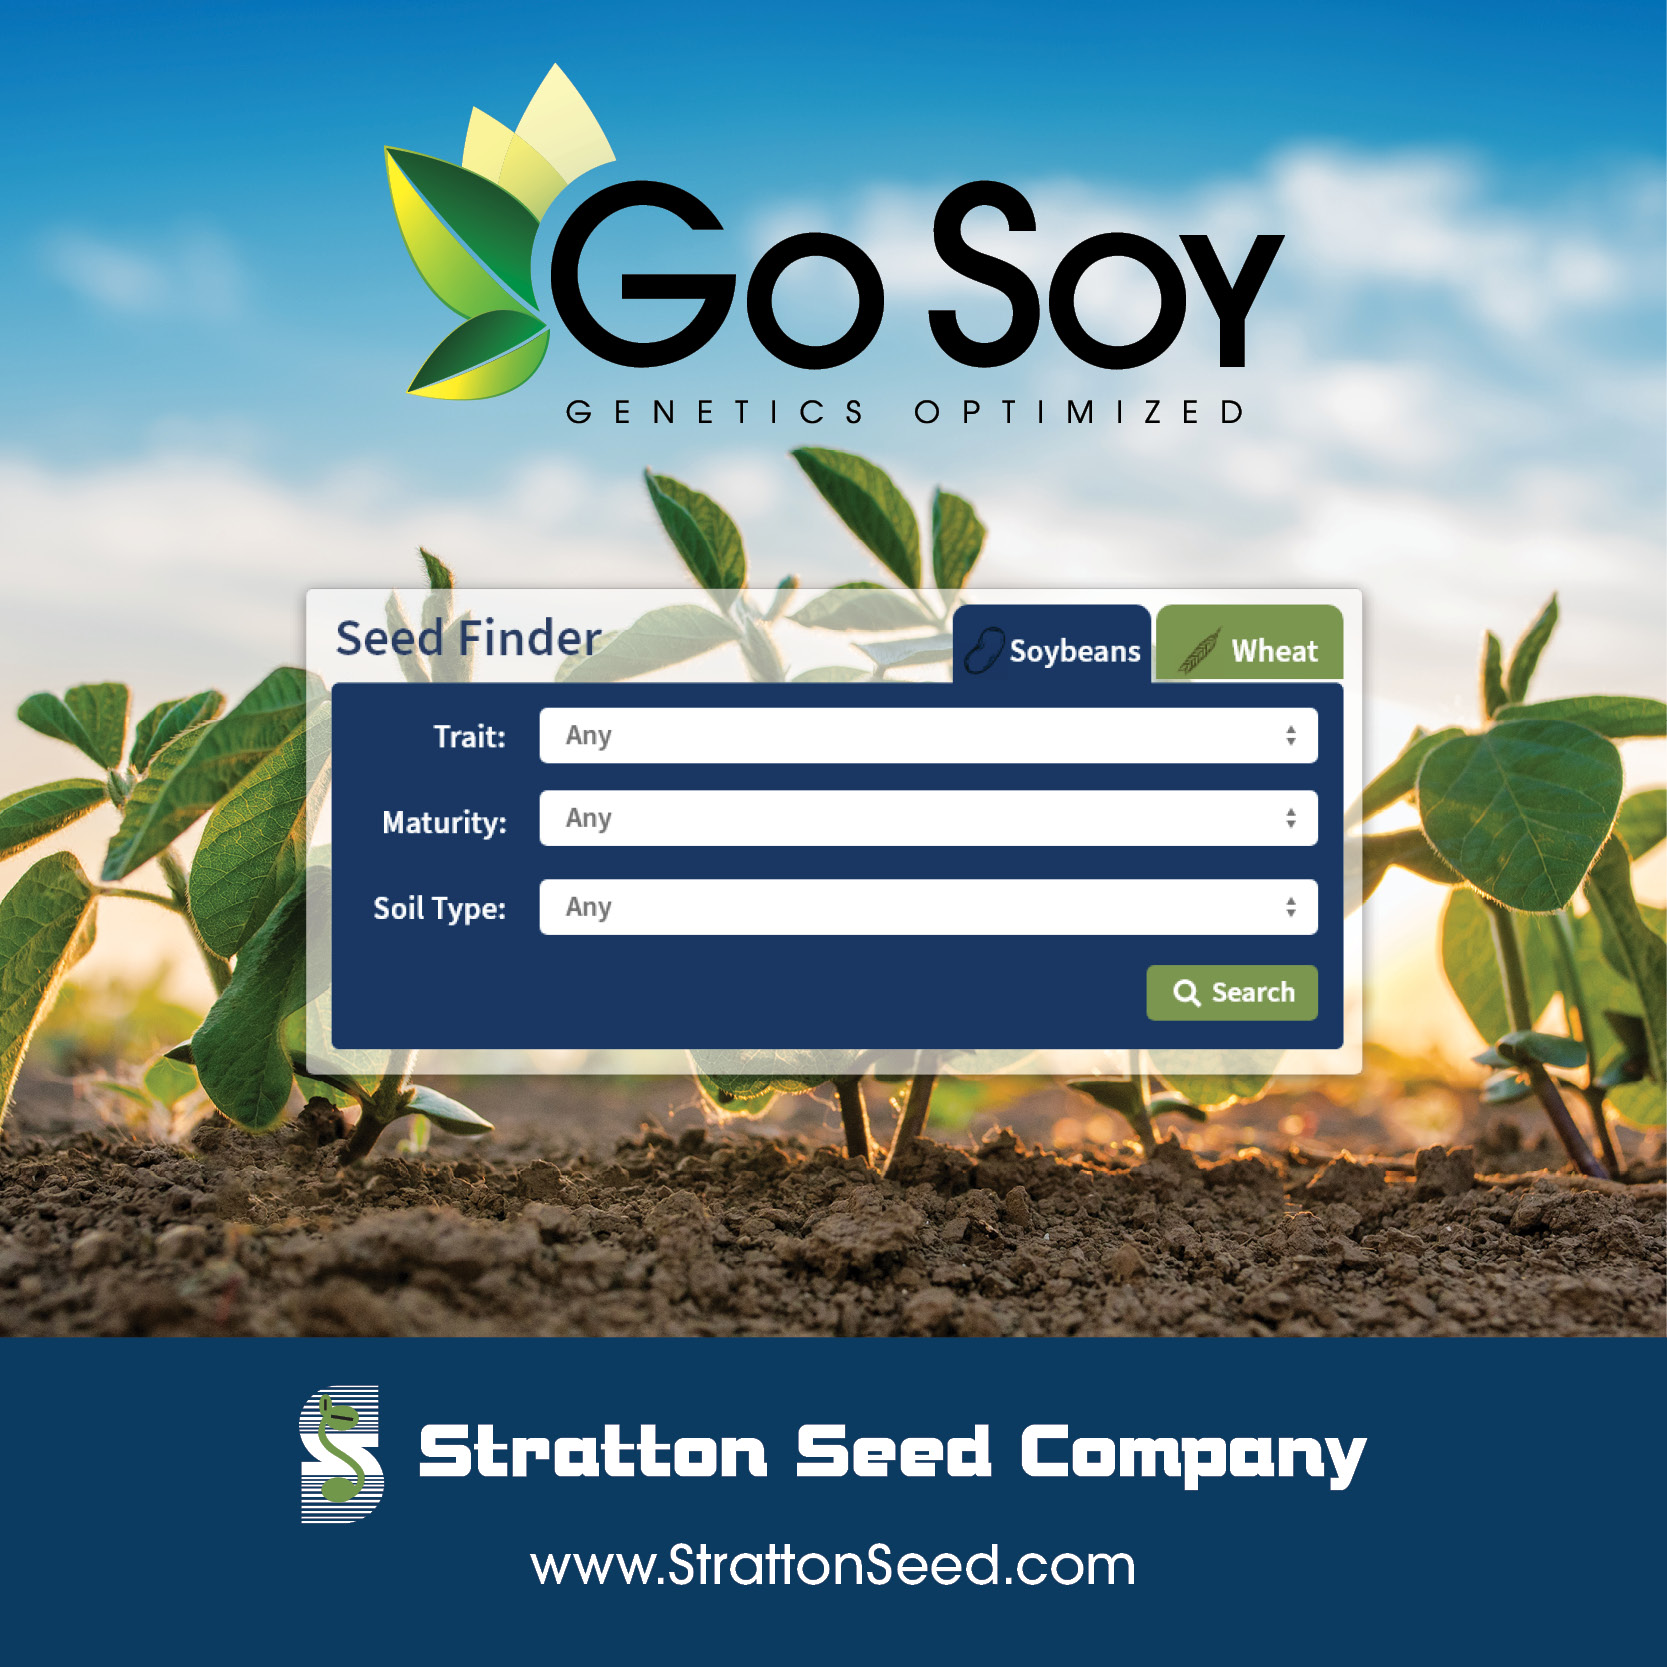 GoSoy social media post highlighting Stratton's online seed finder